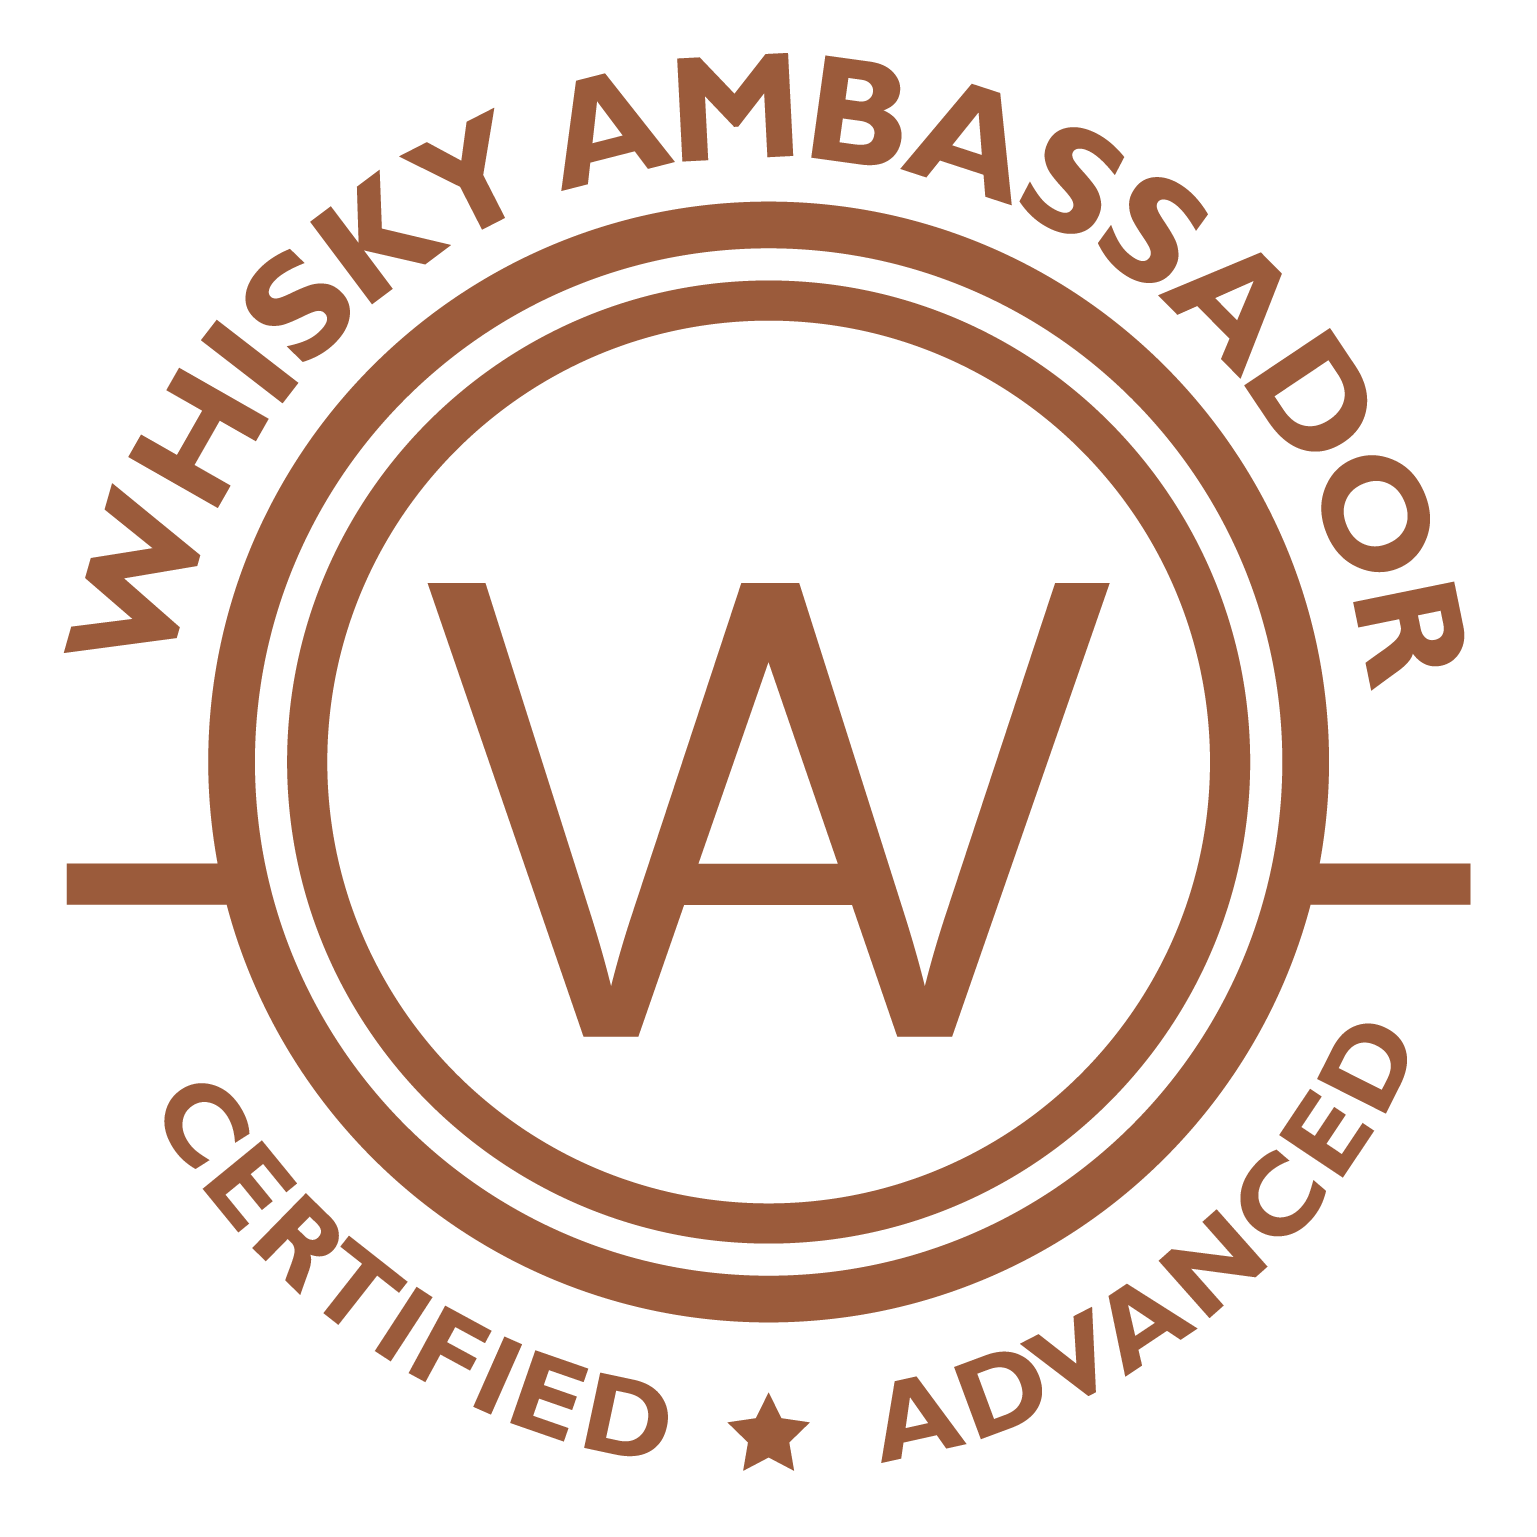 https://www.wealthywhiskysociety.com/media/cache/cms_media/Advanced%20Certified%20png.png